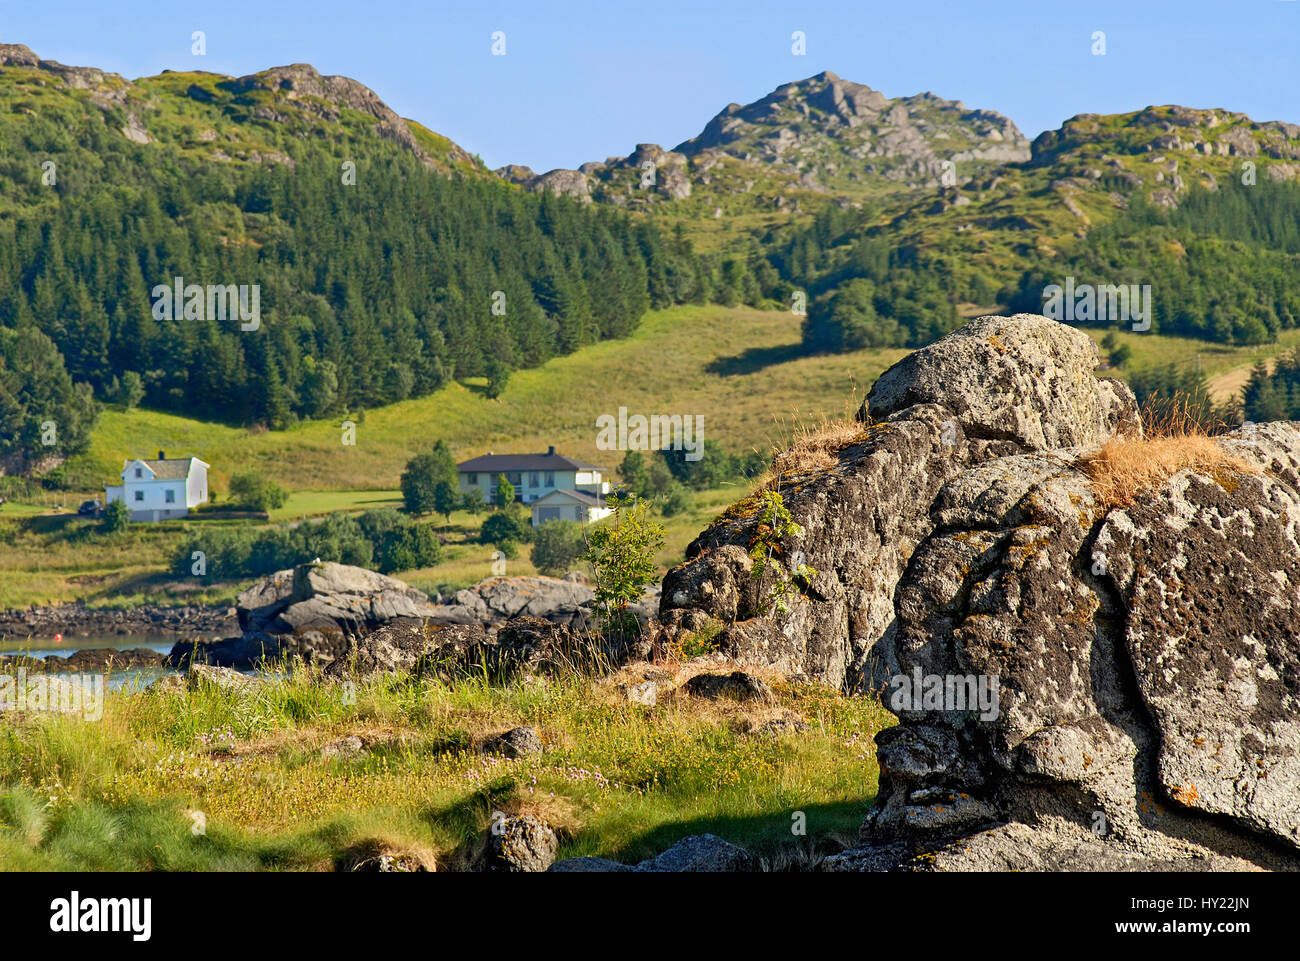 This image shows a picturesque mountain landscape at the Lofoten Island of Vestvagoy that belong to Norway. In the foreground you can see a rock forma Stock Photo